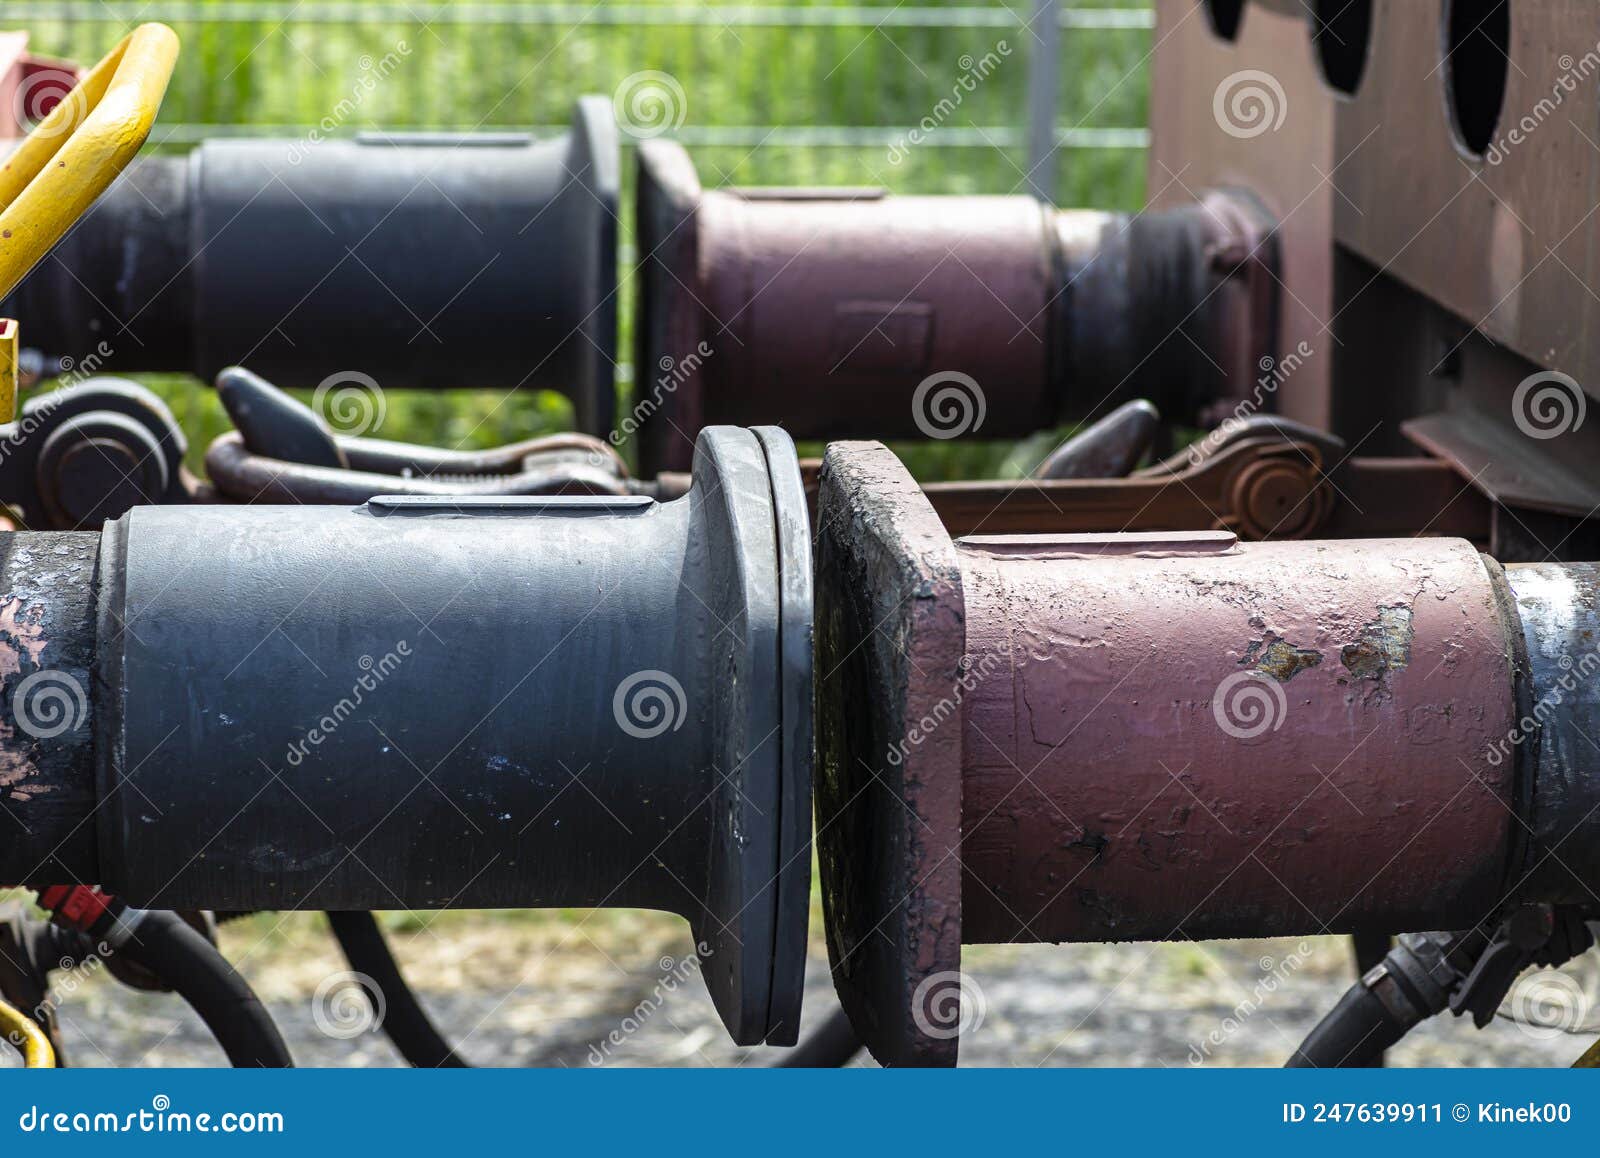 chain coupler connecting freight wagons, large wagon buffers visible.